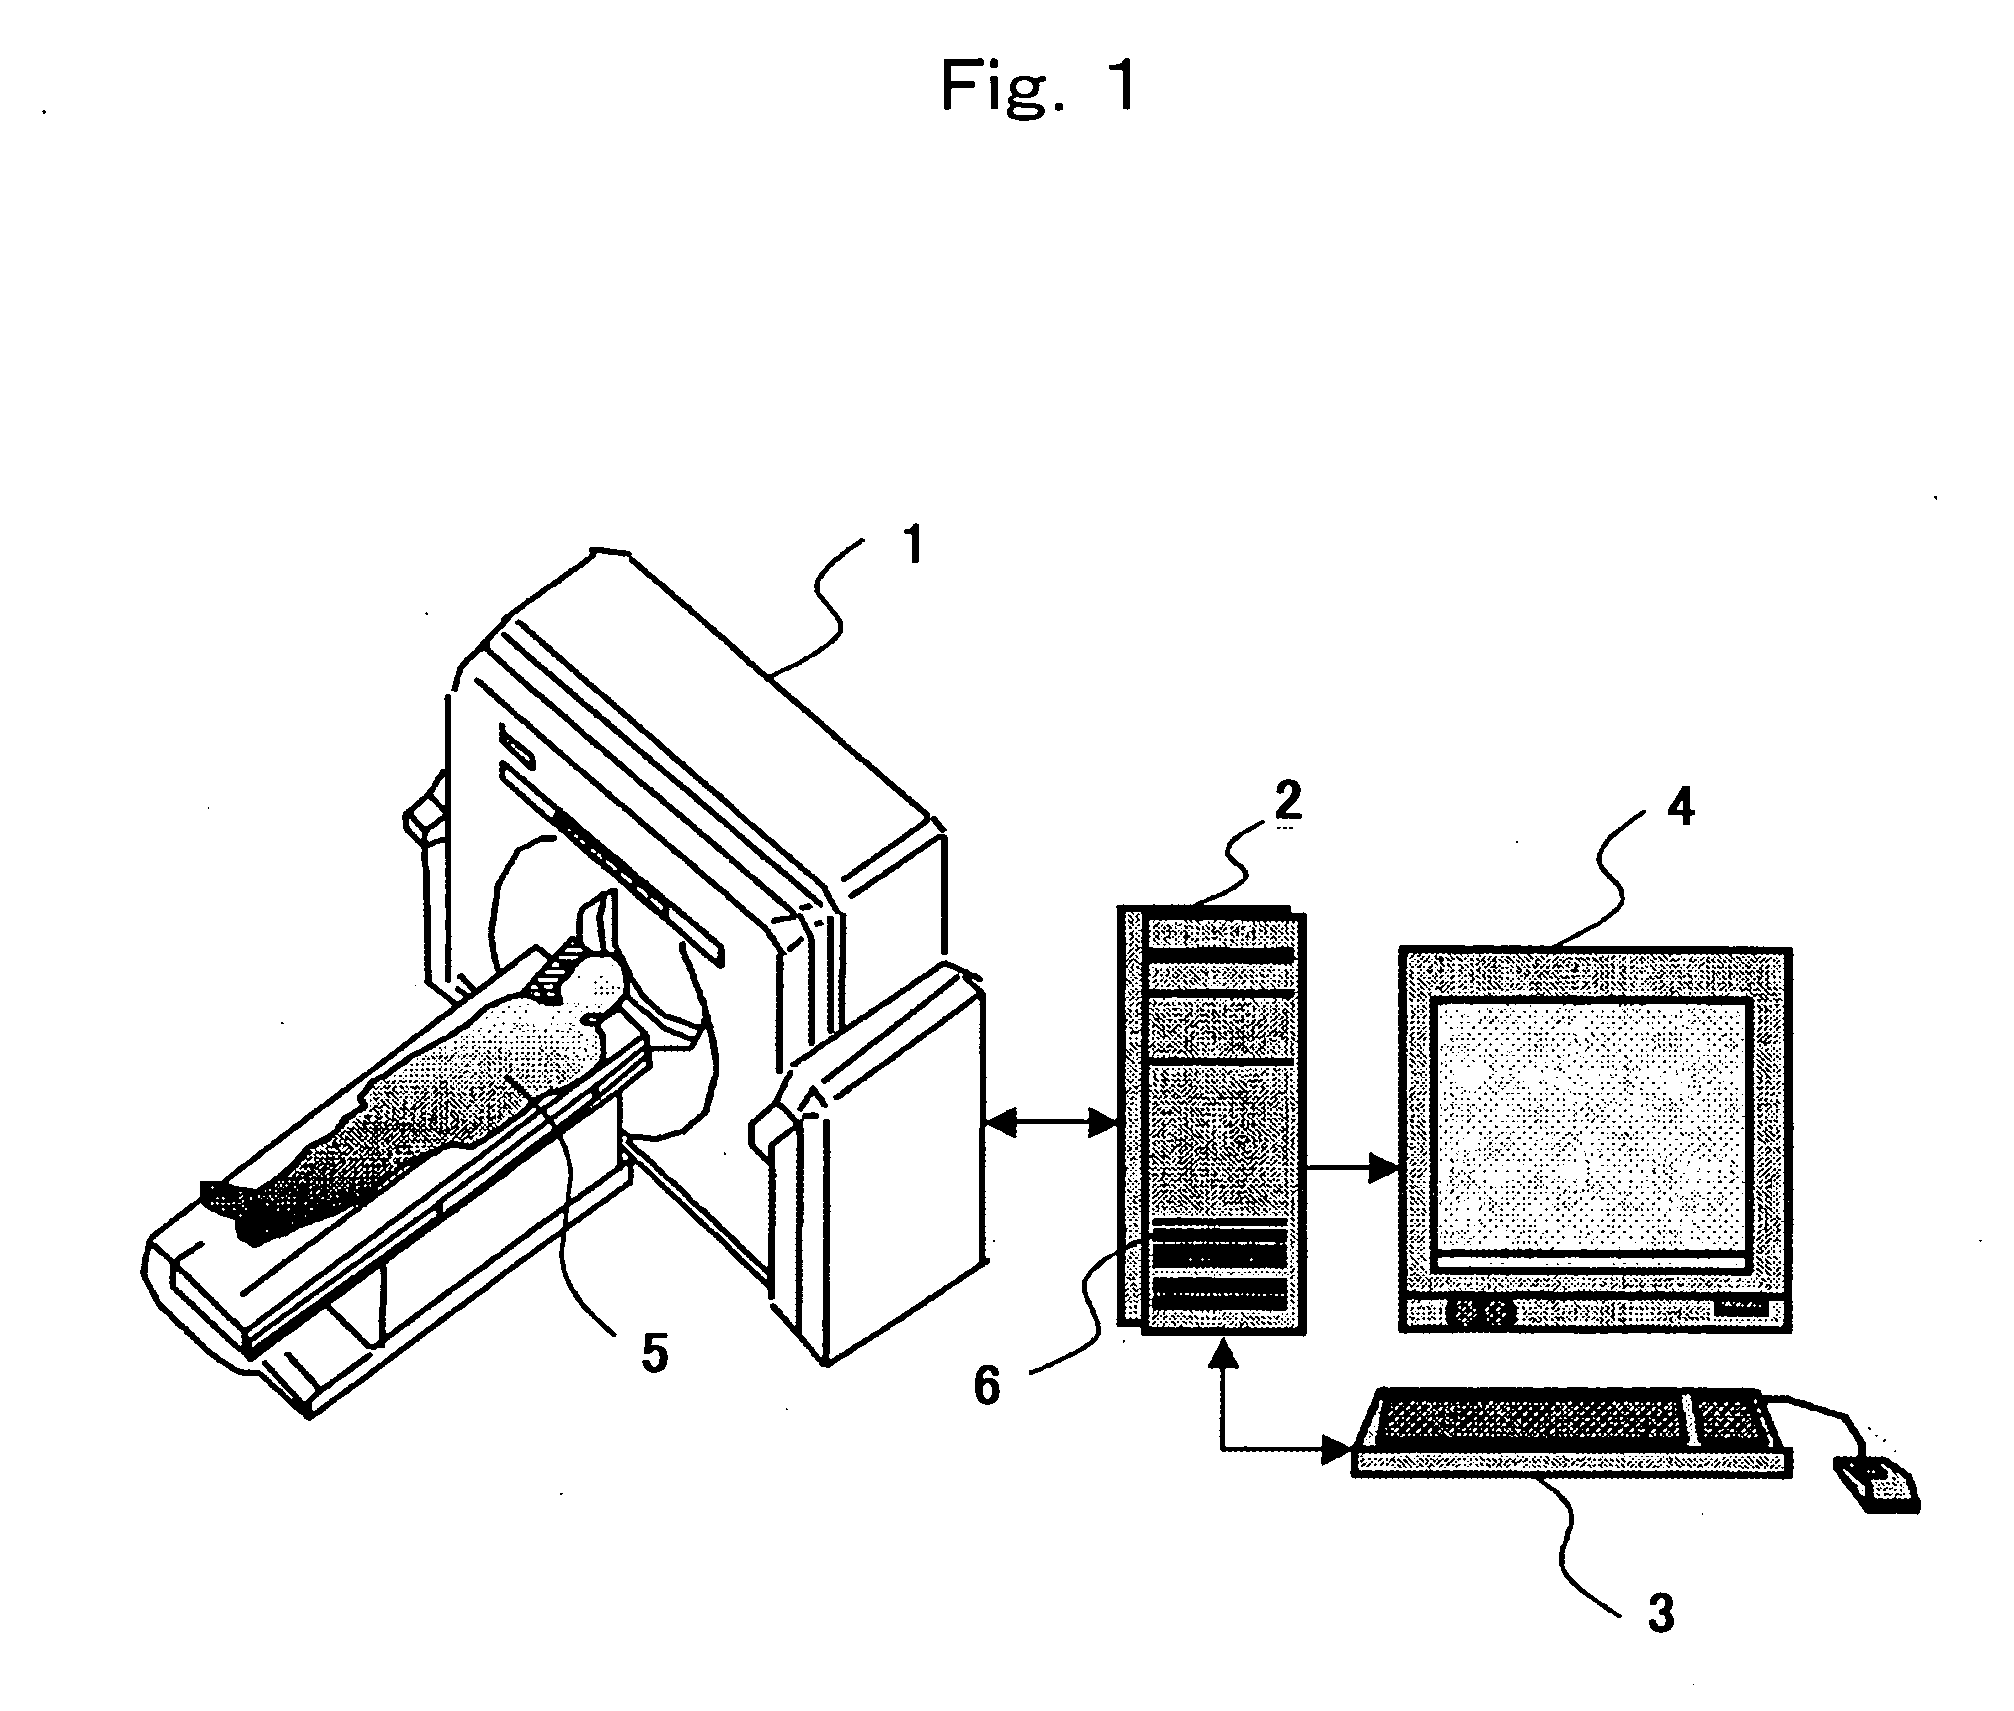 Function image display method and device